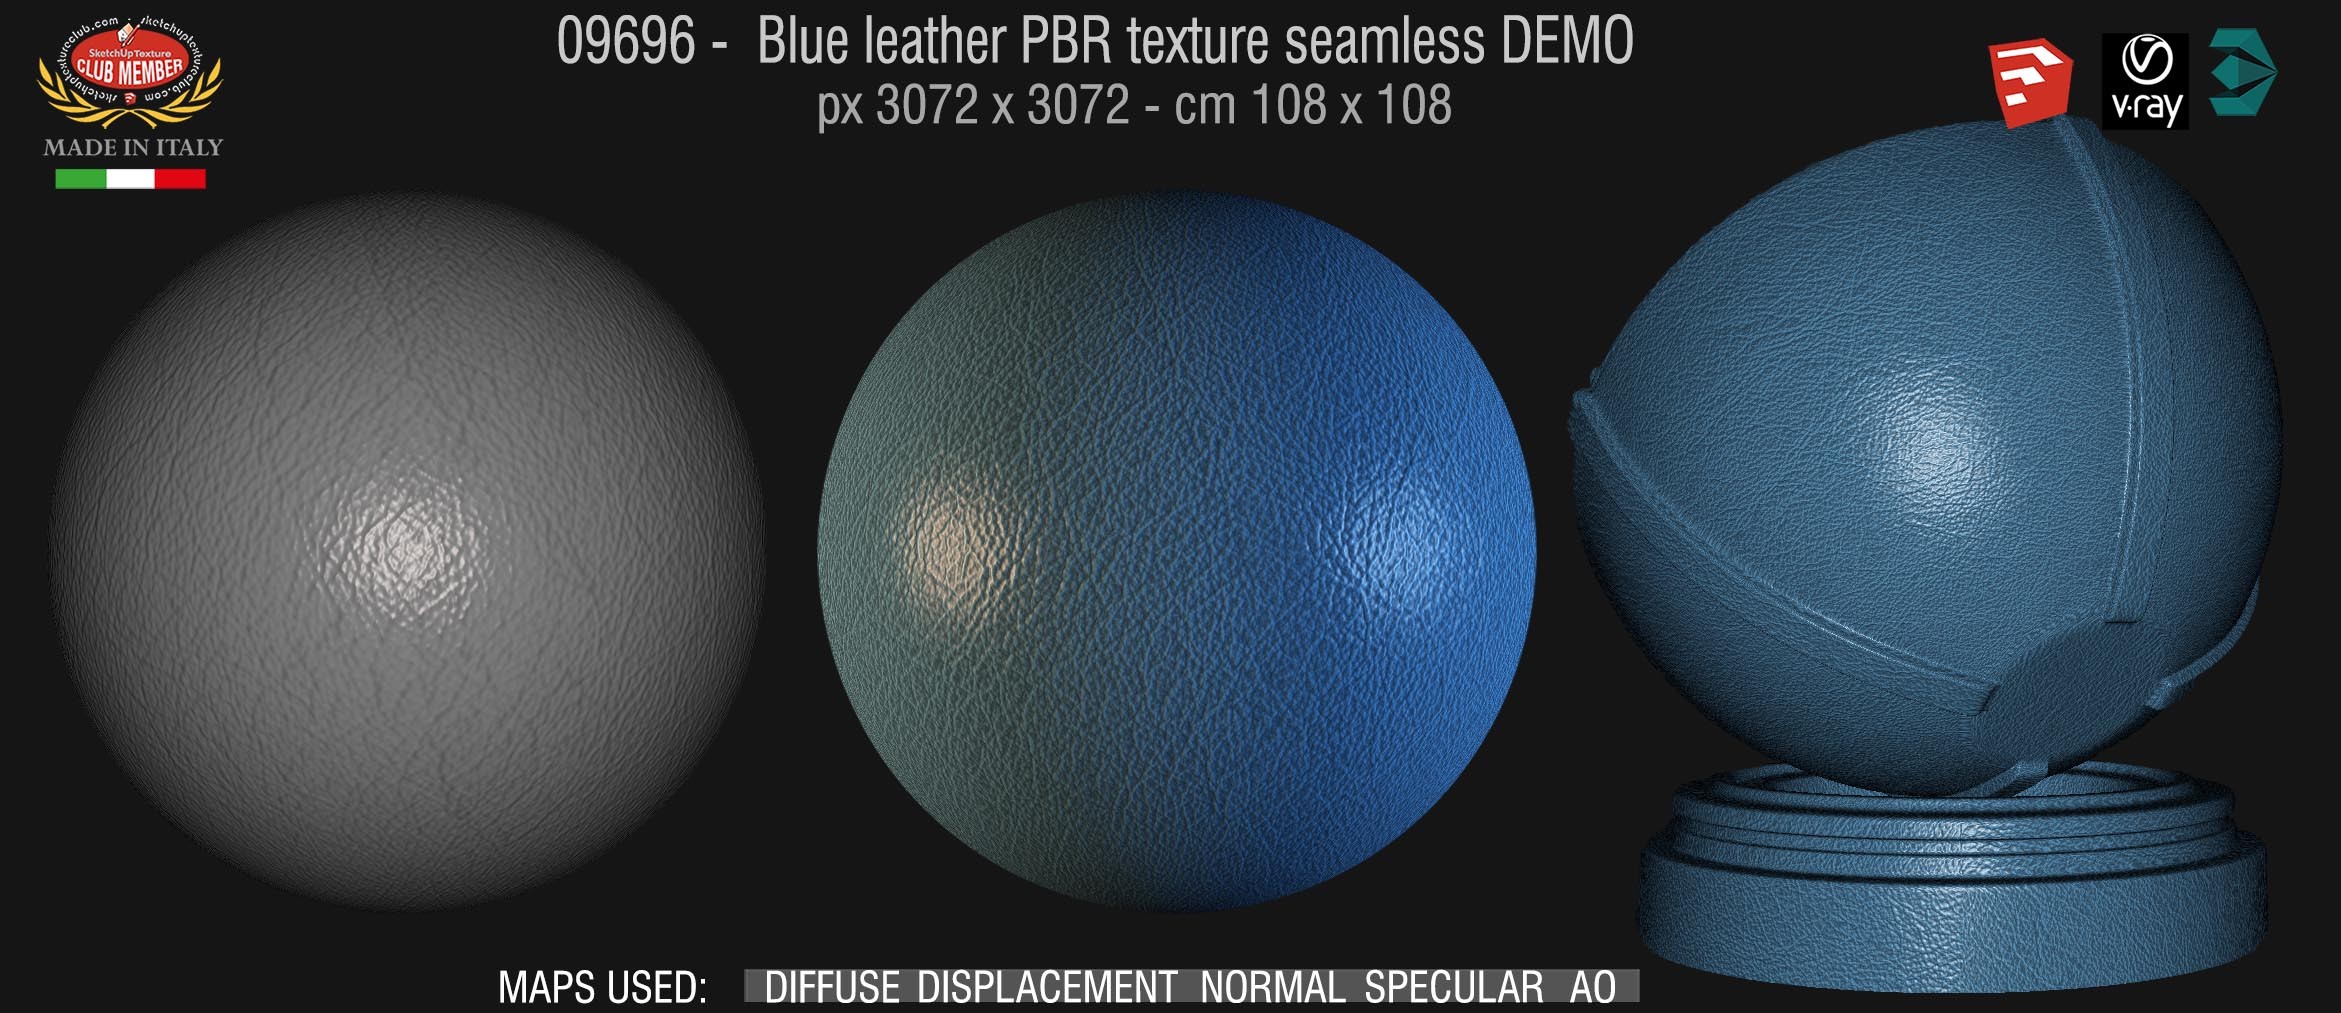 09696 Blue leather PBR texture seamless DEMO